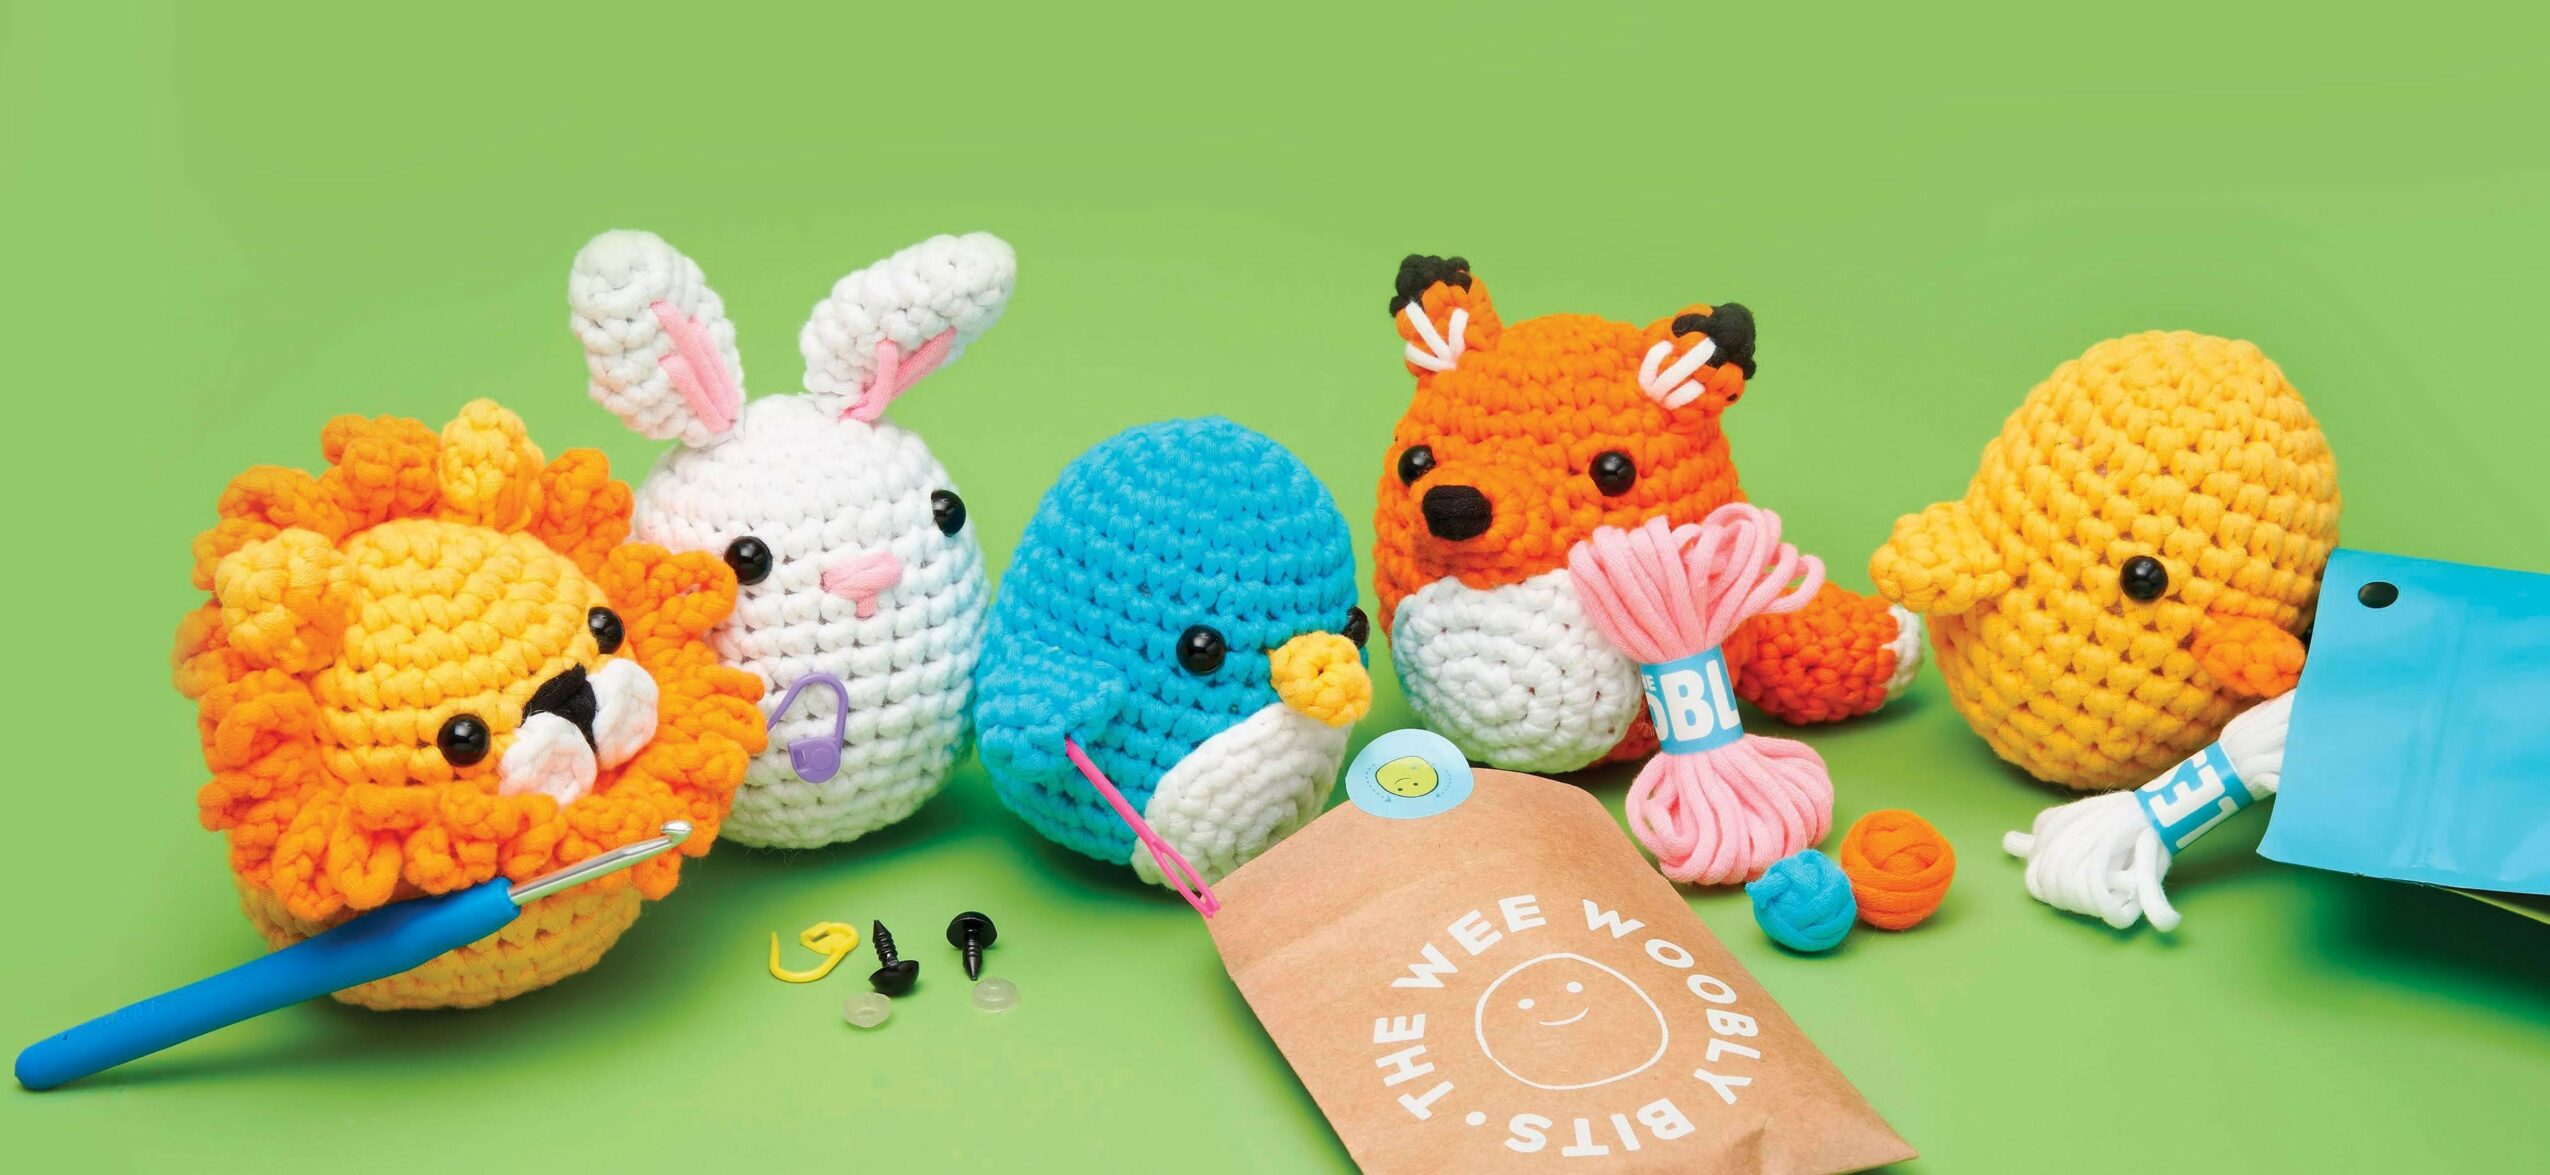 Crochet Amigurumi for Every Occasion by Justine Tiu of The Woobles